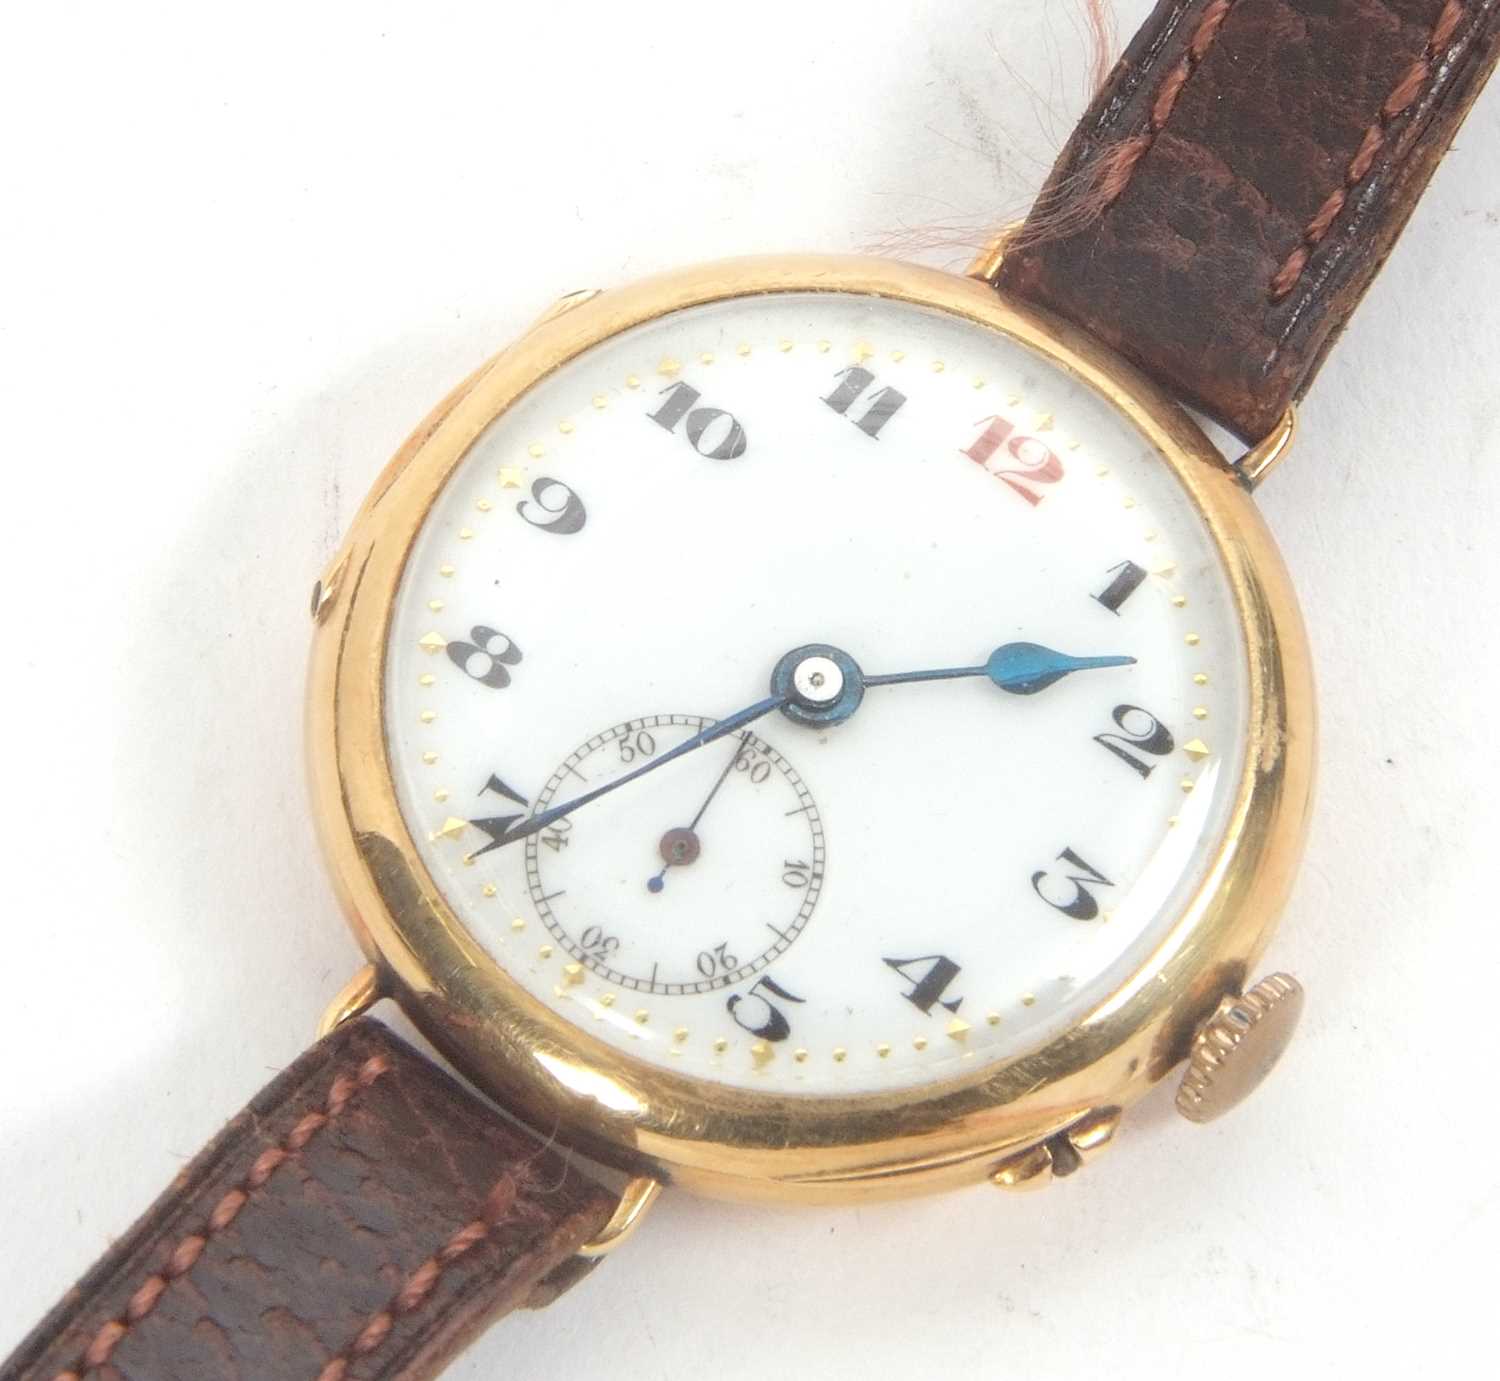 An 18ct gold wristwatch hallmarked inside the back of the case, it has a manually crown wound